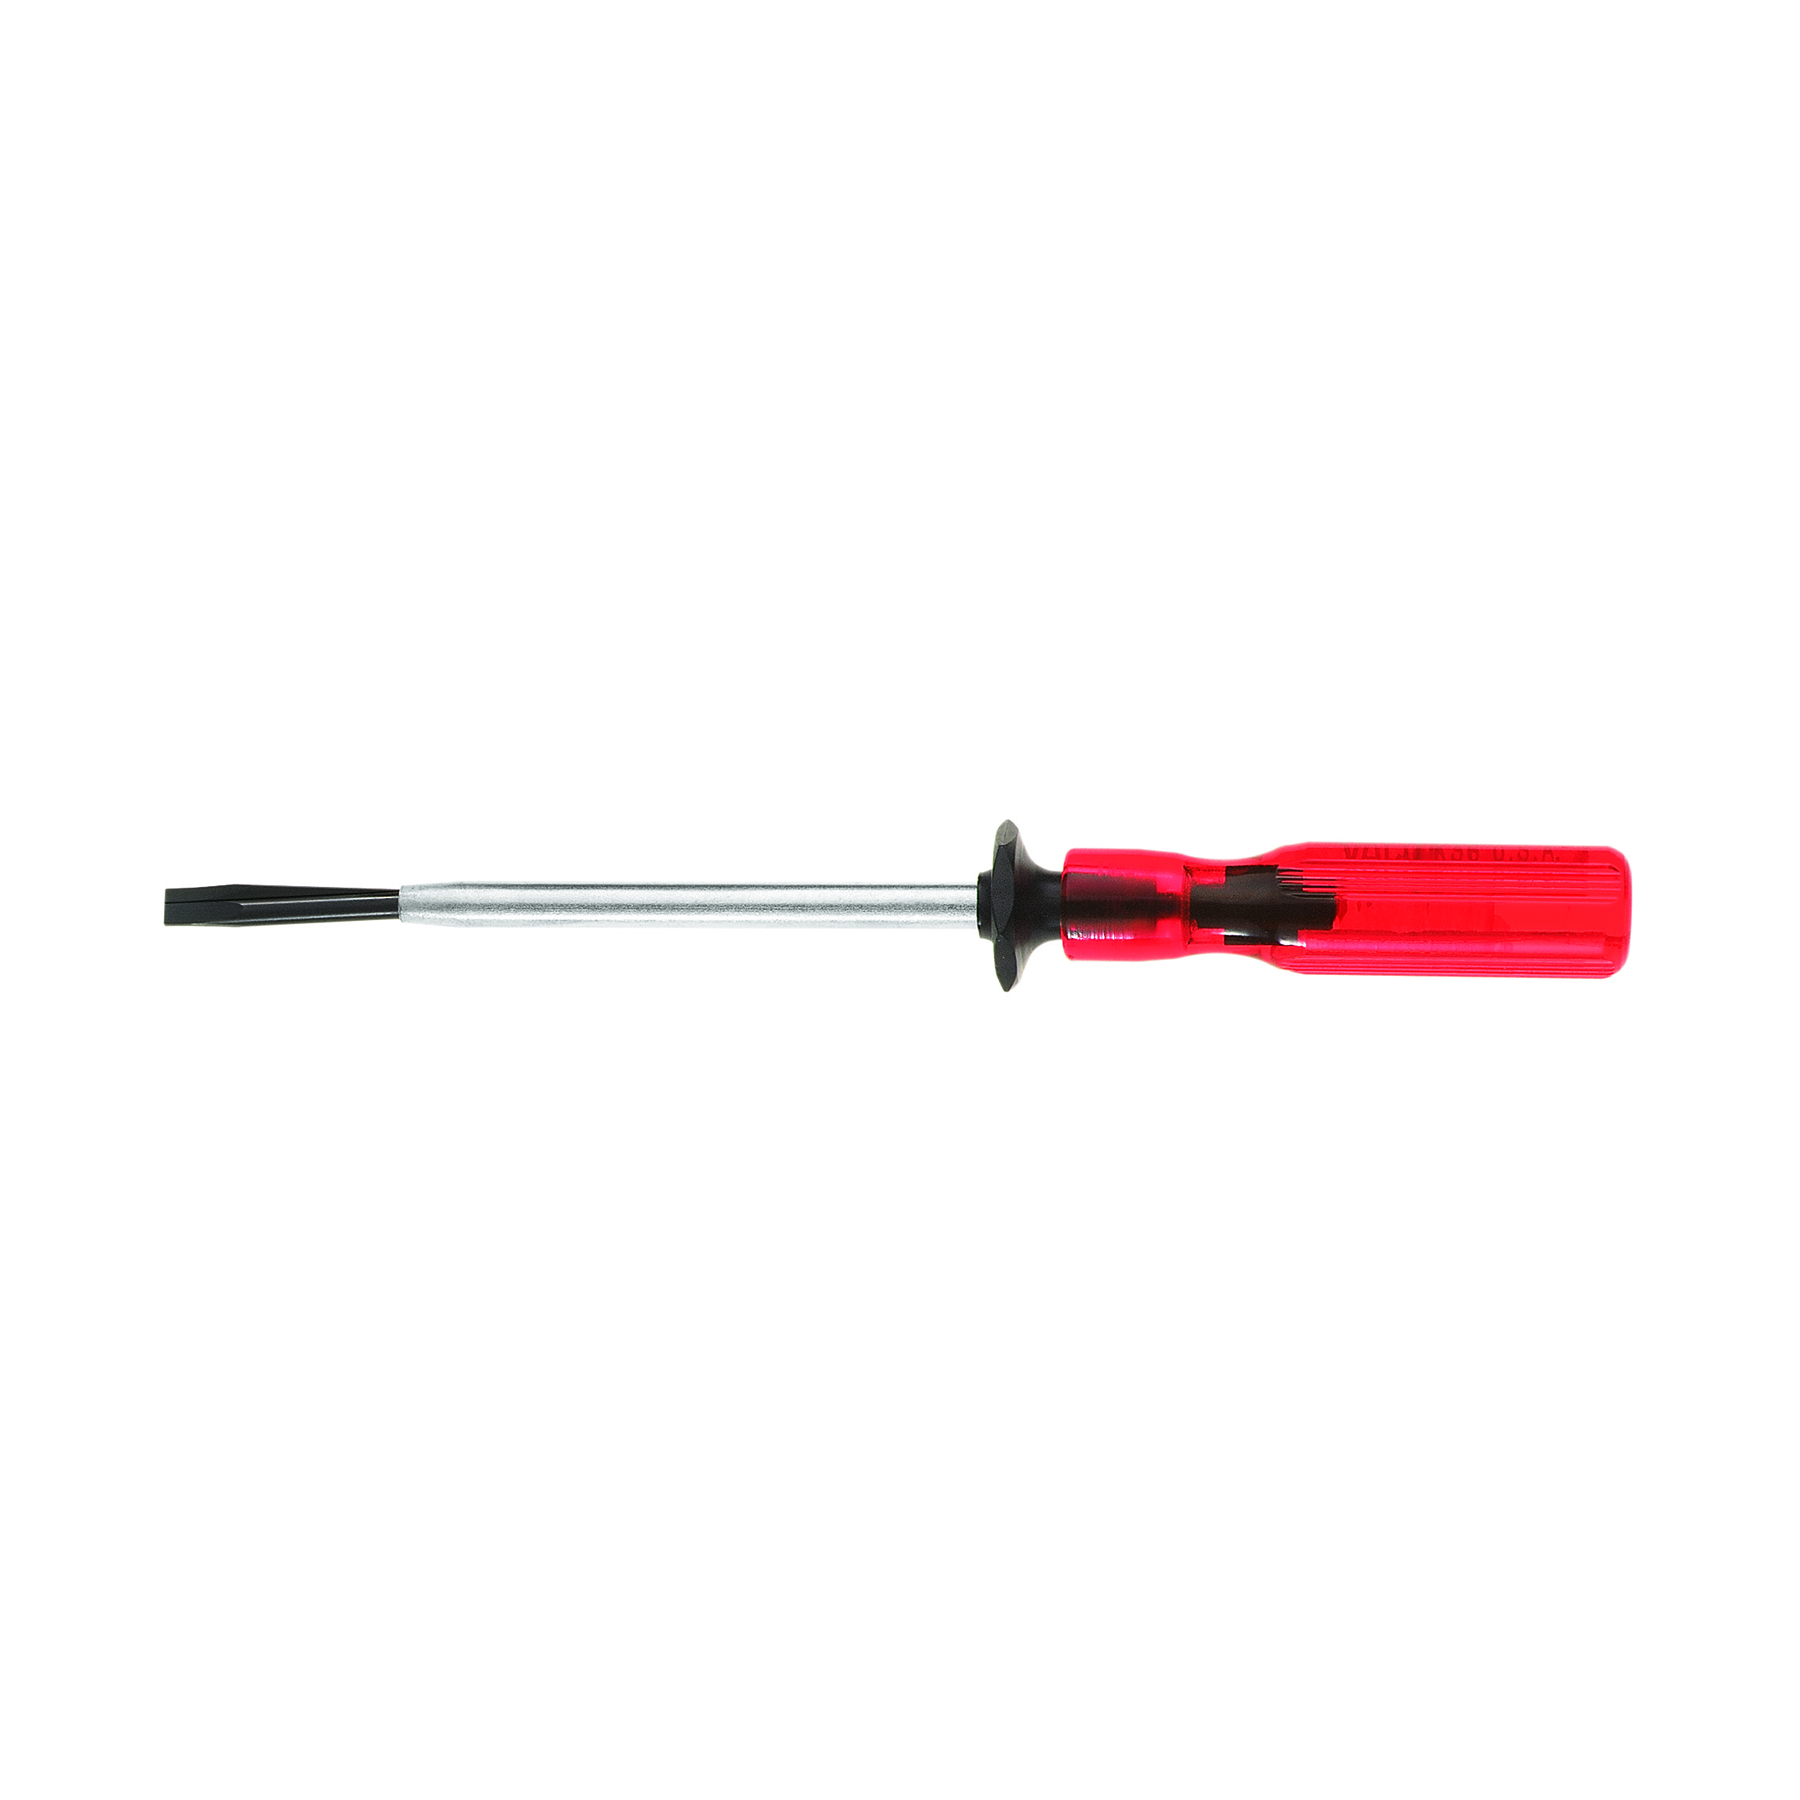 6MM SLOTTED SCREW-HOLDING SCREWDRIVER